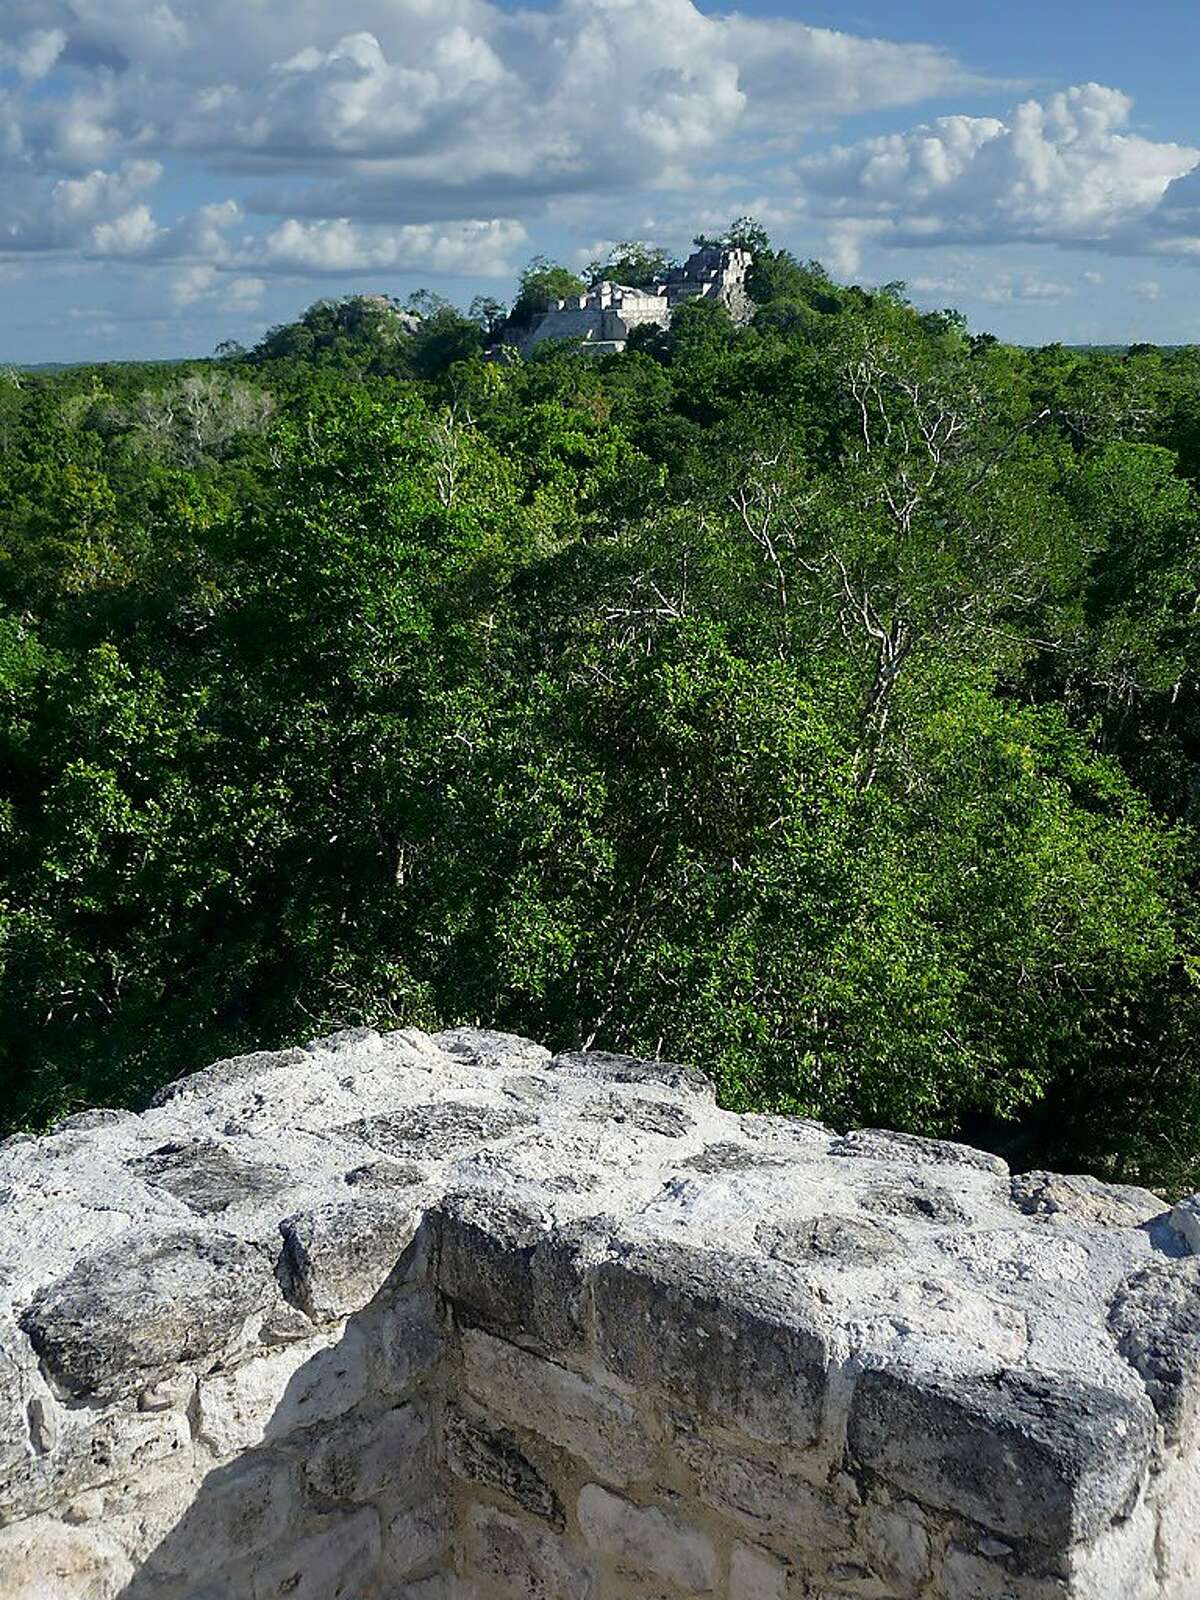 1. Chichen Itza's El Castillo may be Mexico's most famous Maya pyramid, but it's not the tallest. Which archaeological site has two pyramids that top El Castillo's 84 feet?